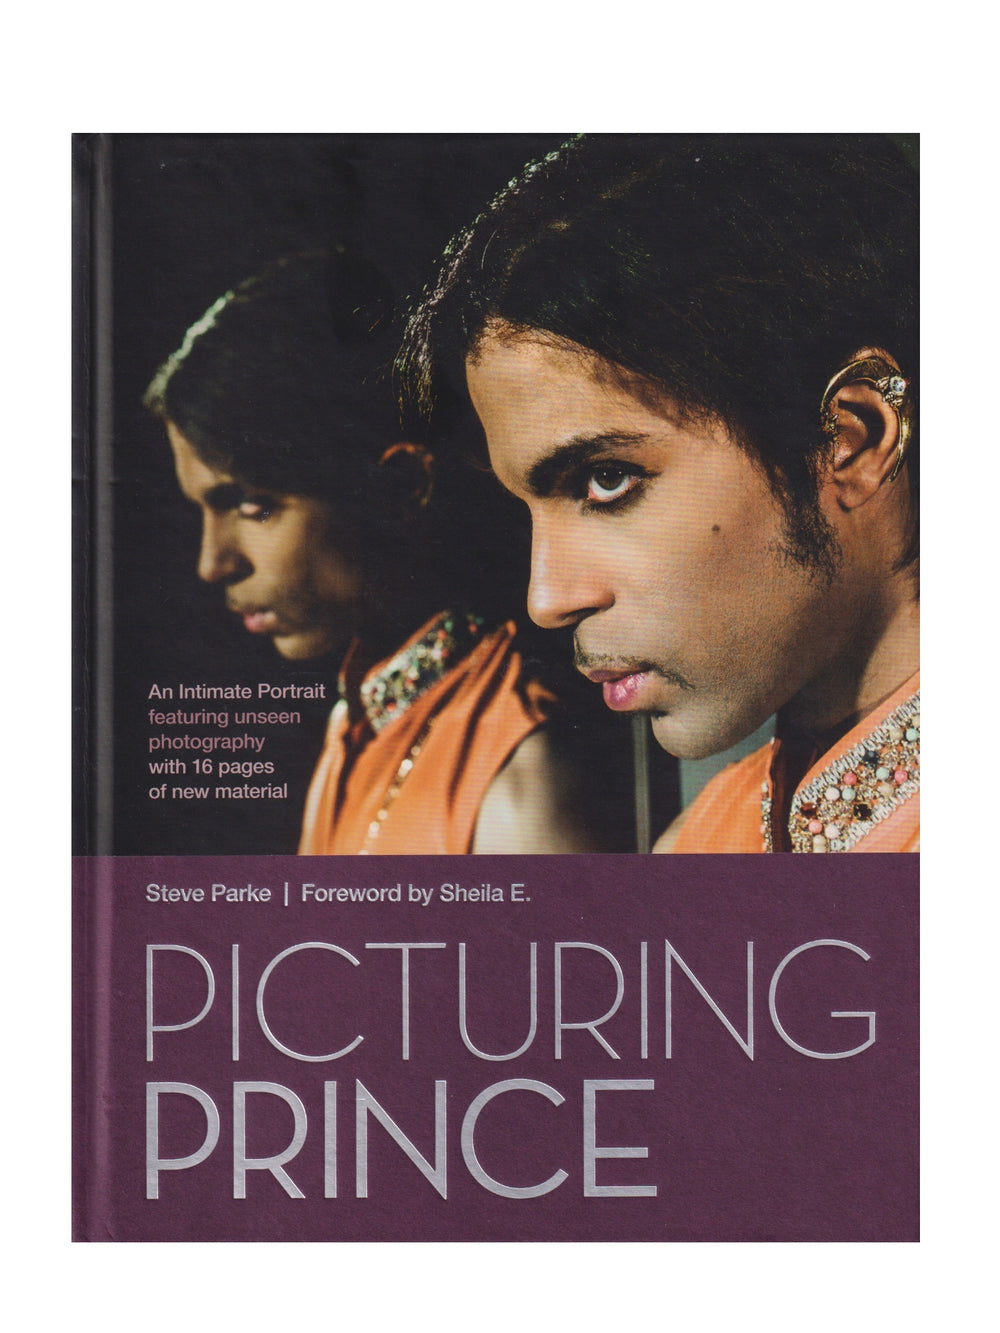 Prince – Picturing Prince : An Intimate Portrait by Steve Parke Hardback Book 16 New Pages